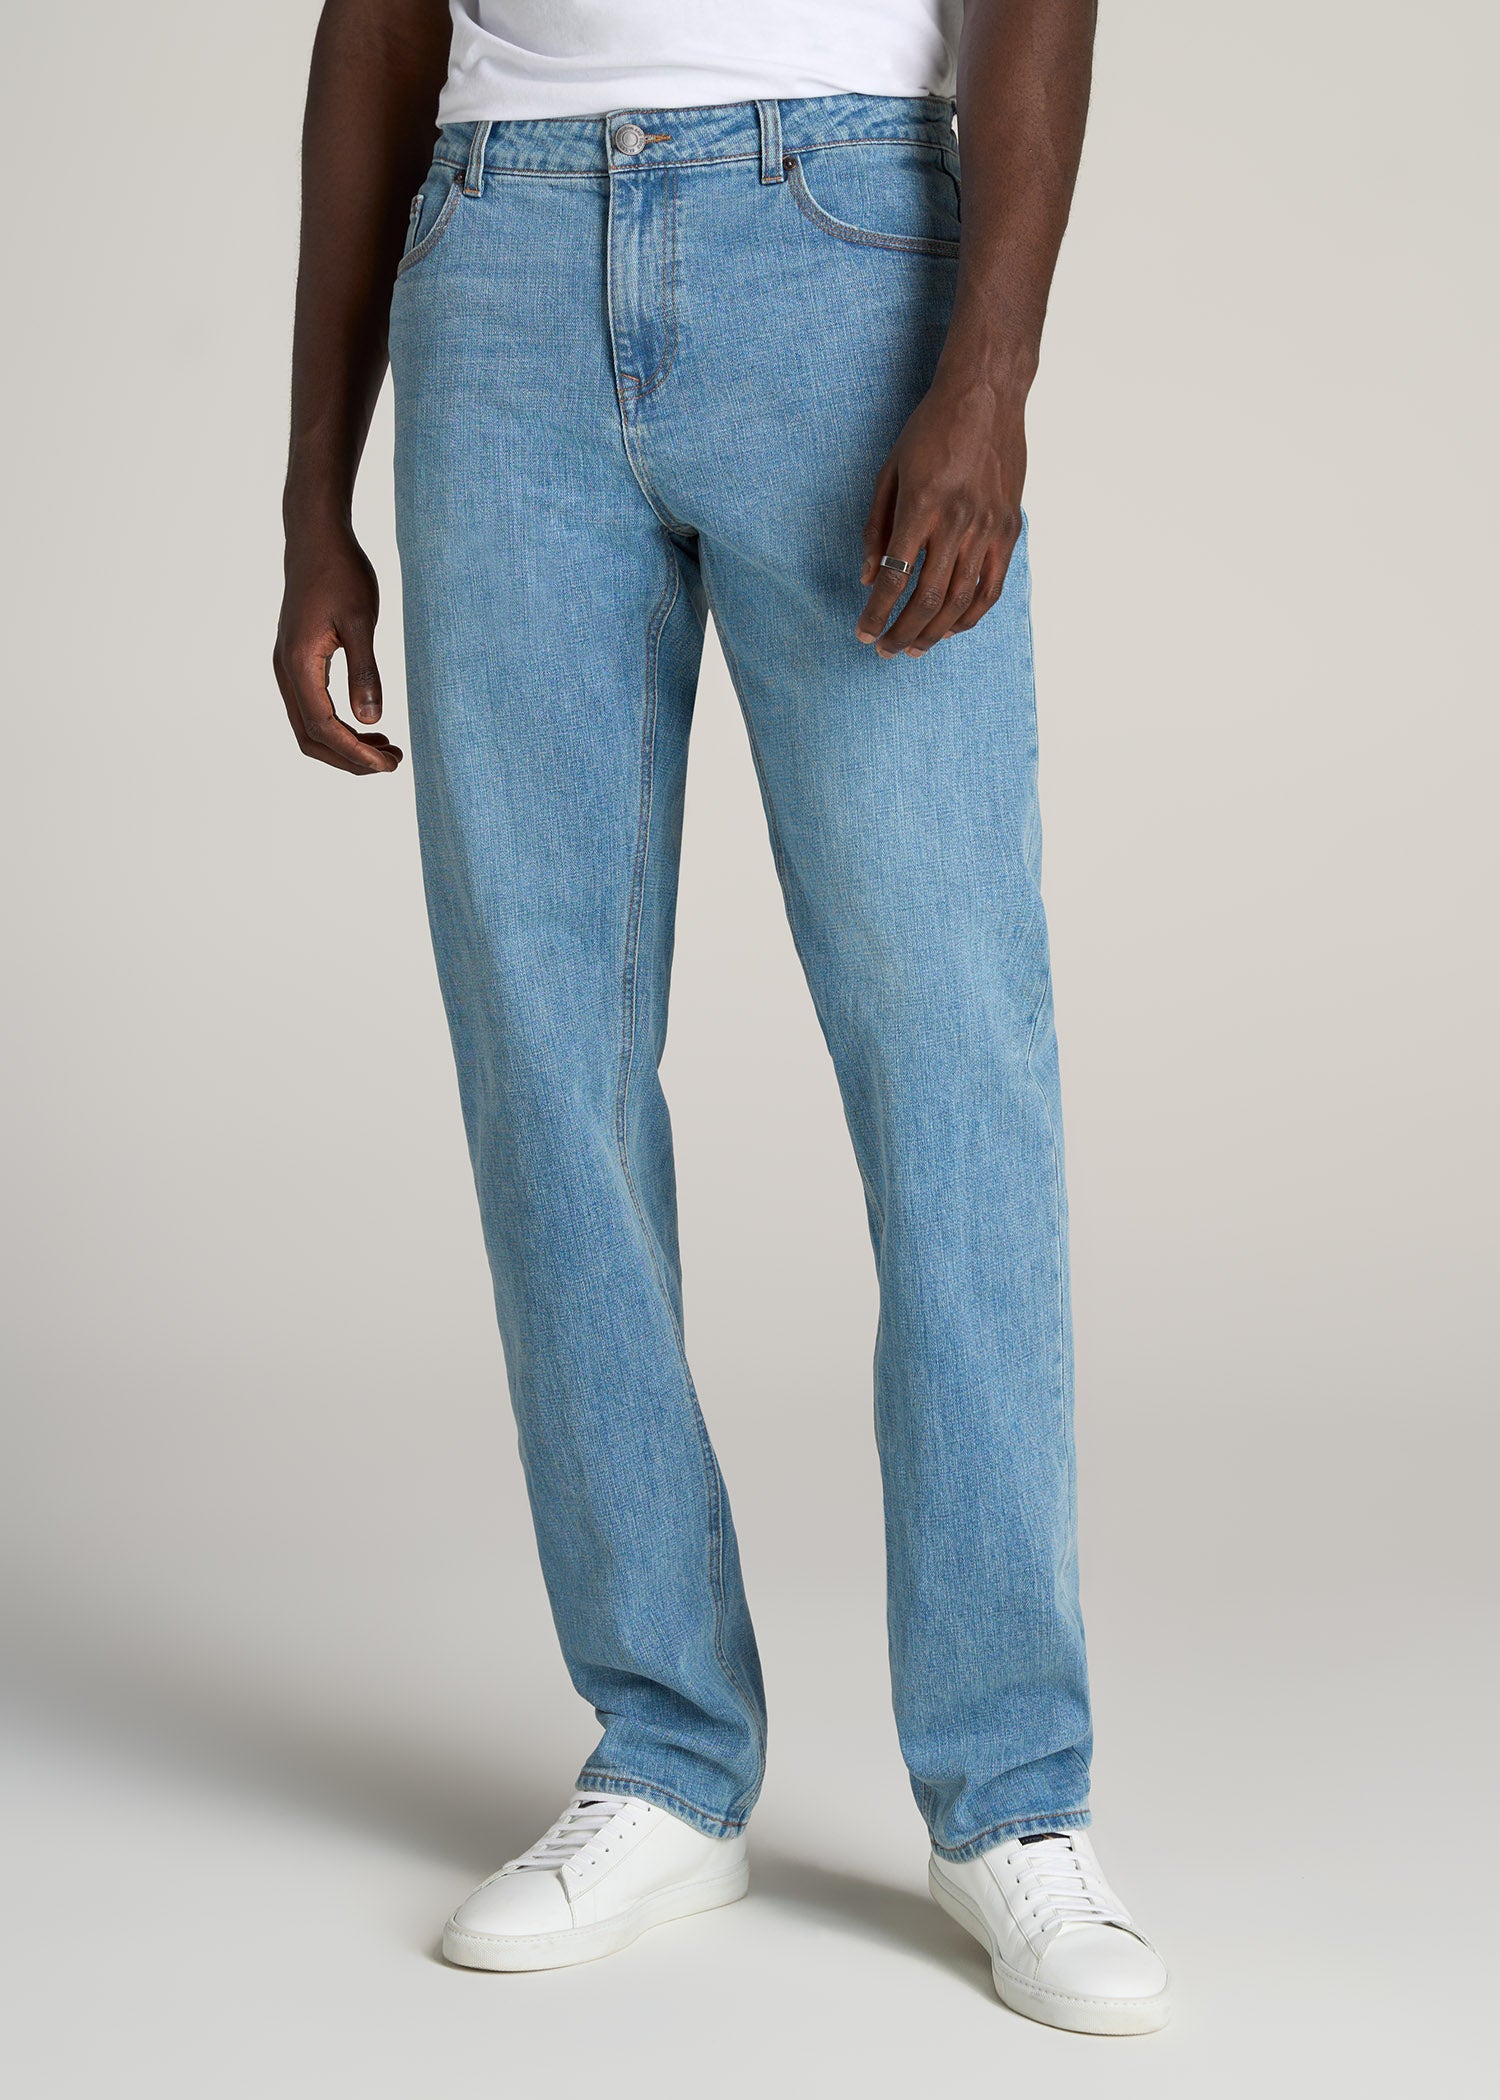    American-Tall-Men-LJS-Rugged-J1-STRAIGHT-LEG-Jeans-Heritage-Faded-front